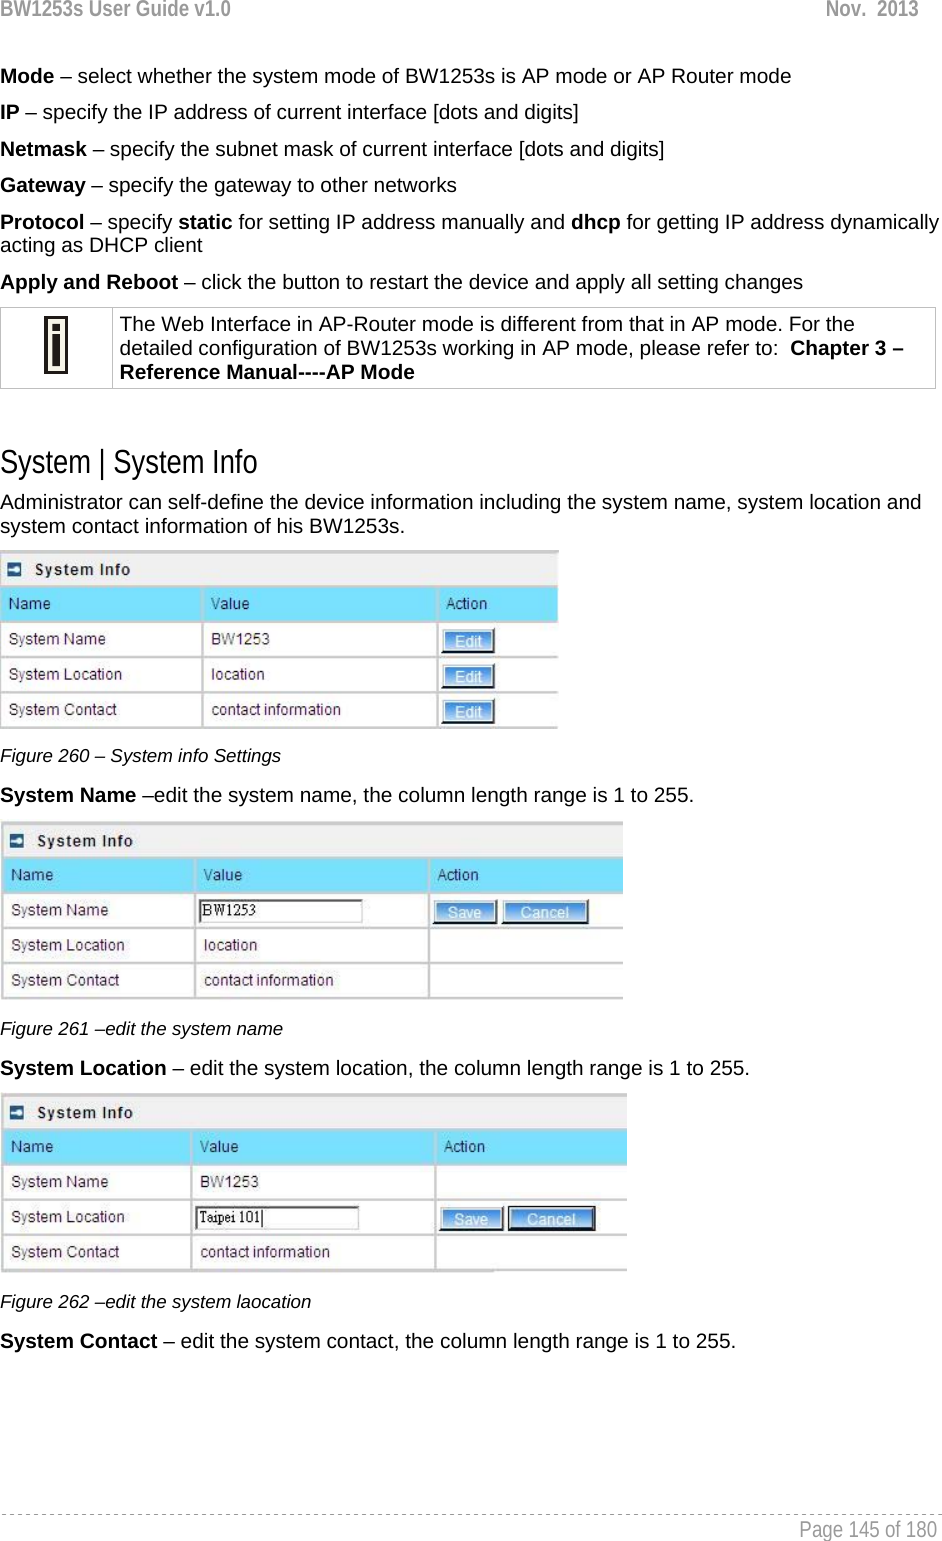 BW1253s User Guide v1.0  Nov.  2013     Page 145 of 180   Mode – select whether the system mode of BW1253s is AP mode or AP Router mode IP – specify the IP address of current interface [dots and digits] Netmask – specify the subnet mask of current interface [dots and digits] Gateway – specify the gateway to other networks Protocol – specify static for setting IP address manually and dhcp for getting IP address dynamically acting as DHCP client Apply and Reboot – click the button to restart the device and apply all setting changes  The Web Interface in AP-Router mode is different from that in AP mode. For the detailed configuration of BW1253s working in AP mode, please refer to:  Chapter 3 – Reference Manual----AP Mode  System | System Info Administrator can self-define the device information including the system name, system location and system contact information of his BW1253s.  Figure 260 – System info Settings System Name –edit the system name, the column length range is 1 to 255.  Figure 261 –edit the system name System Location – edit the system location, the column length range is 1 to 255.  Figure 262 –edit the system laocation System Contact – edit the system contact, the column length range is 1 to 255. 